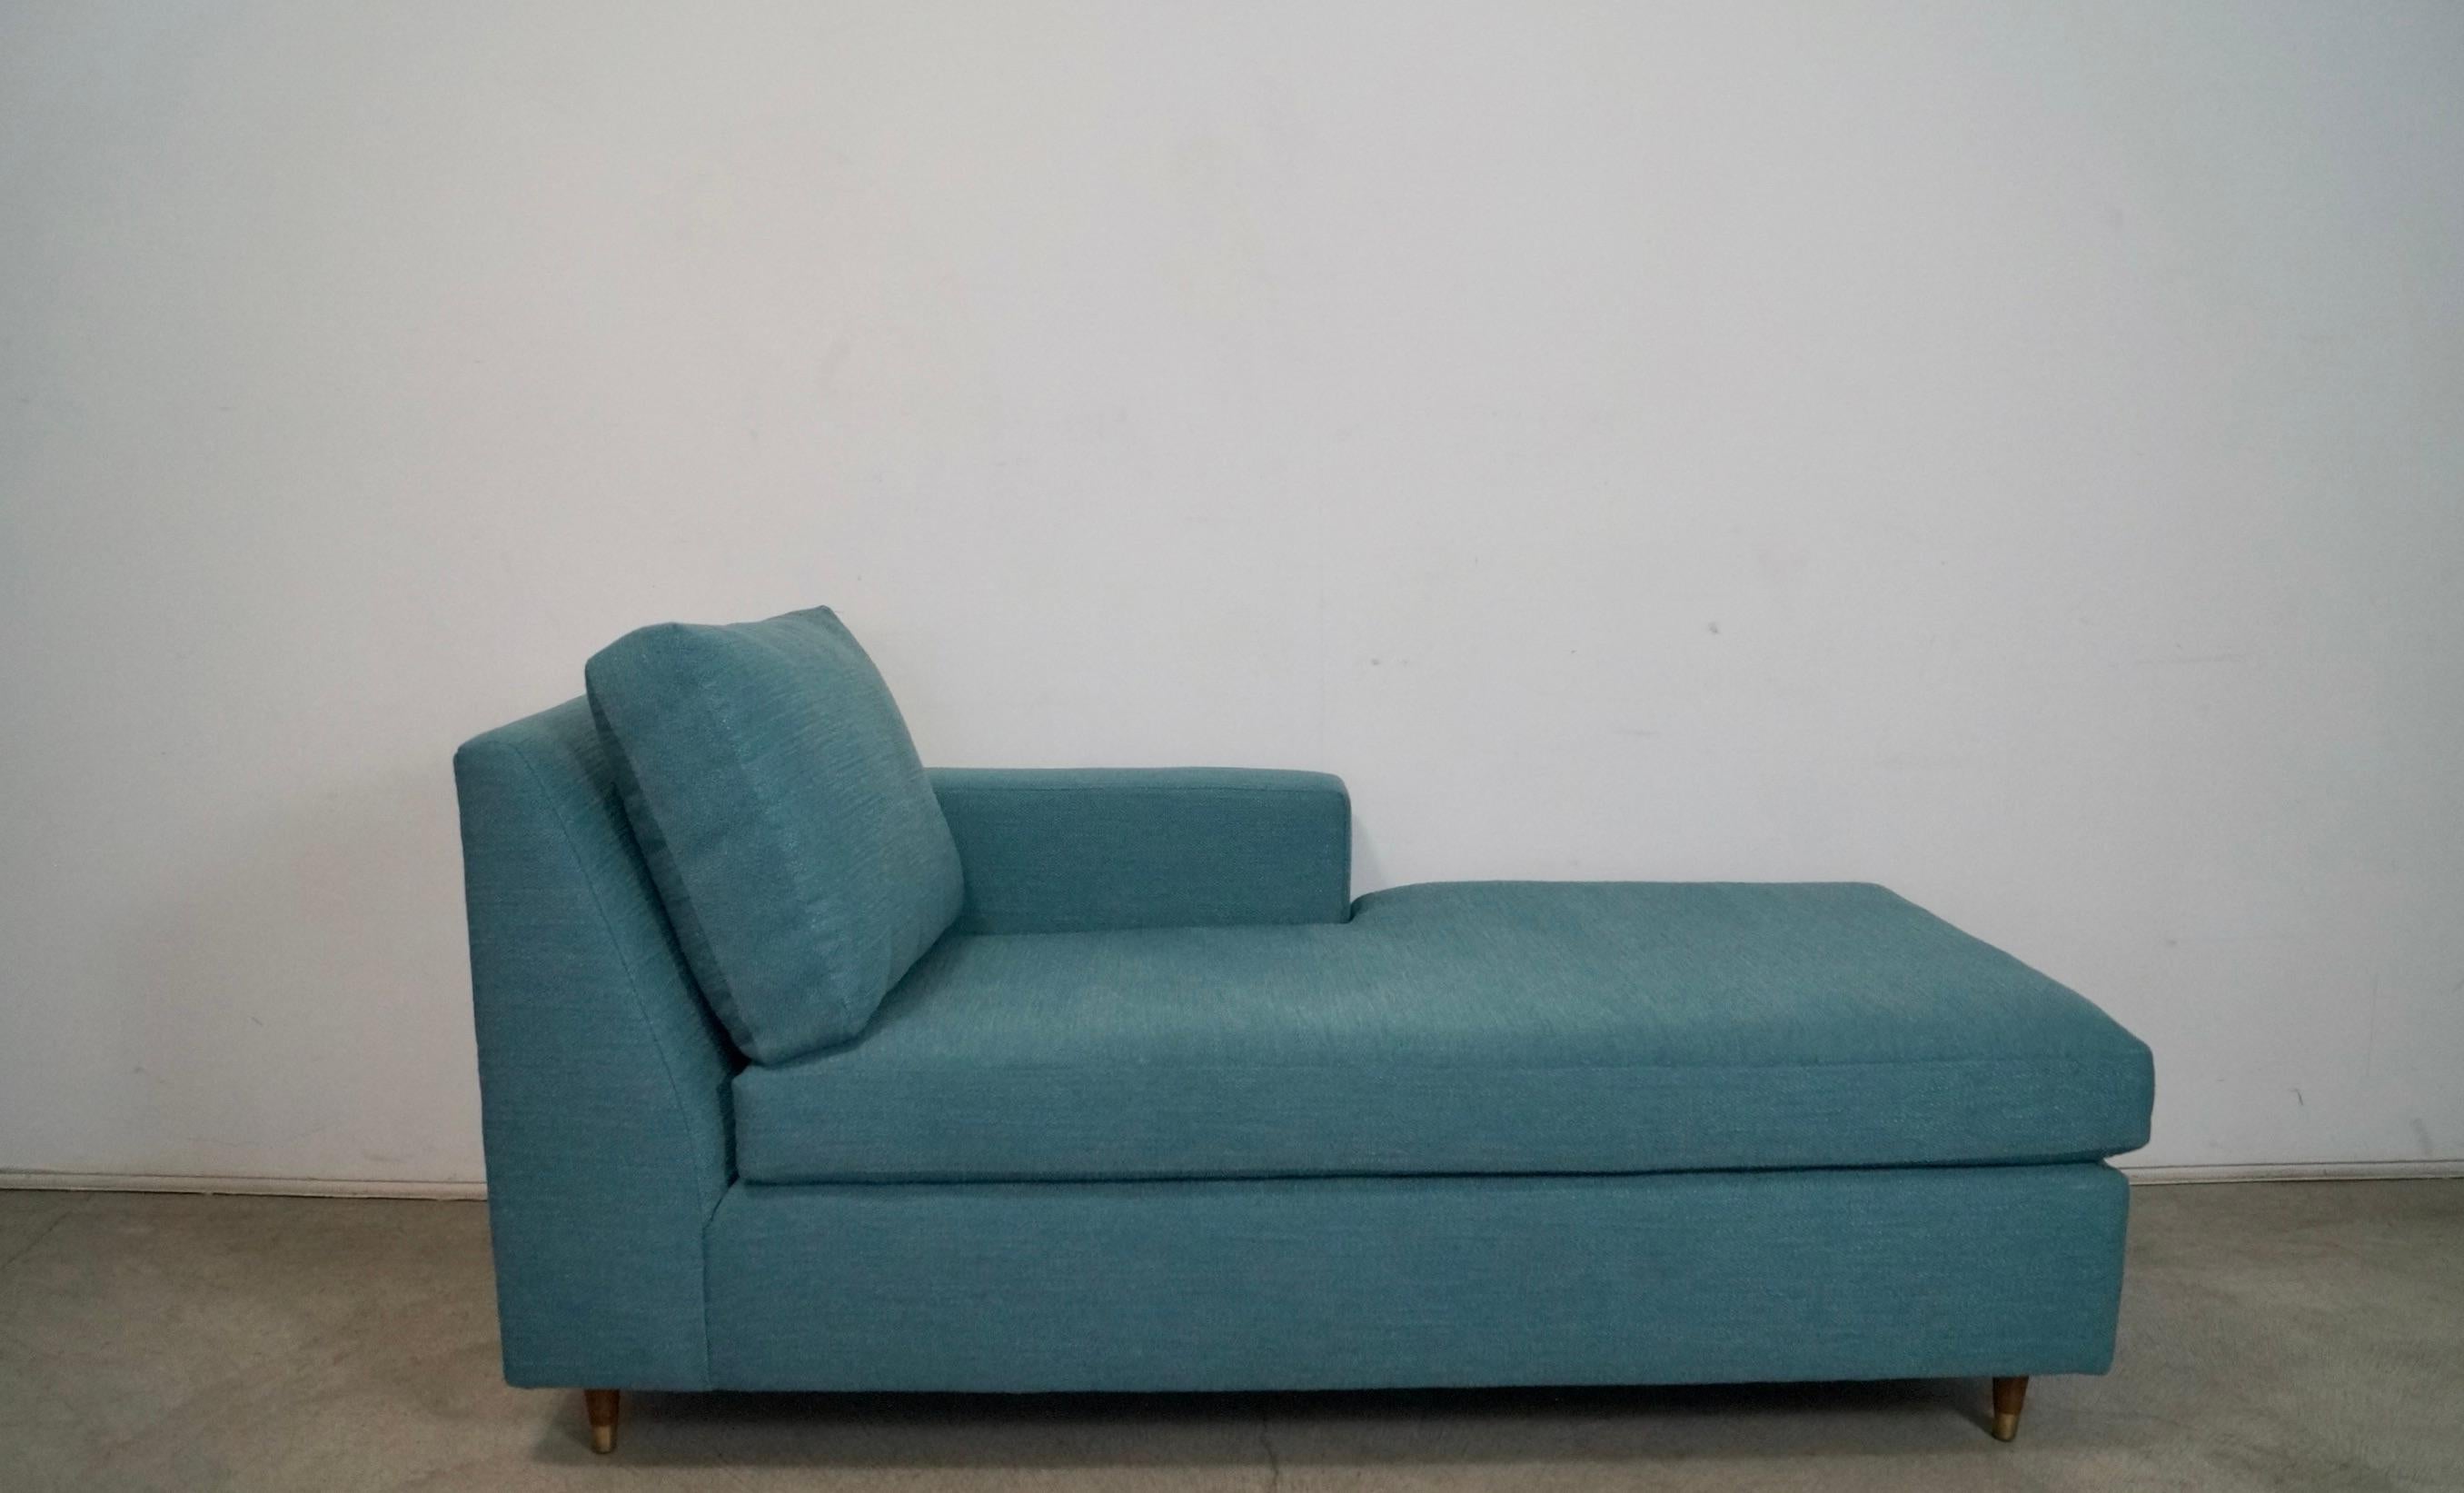 1970's Mid-Century Modern Single Arm Reupholstered Chaise Lounge Daybed In Excellent Condition For Sale In Burbank, CA